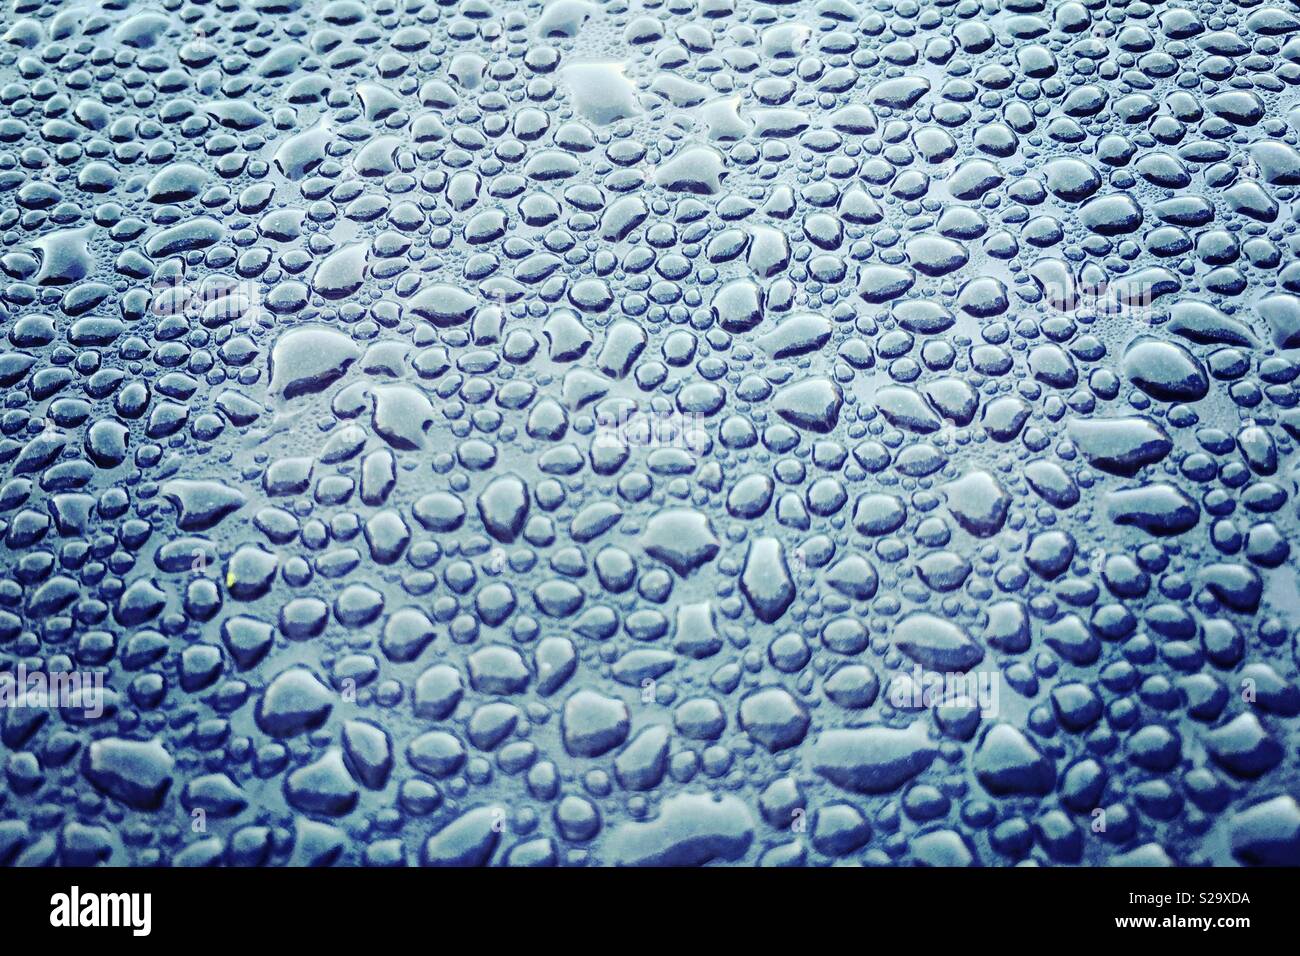 Water droplets on black metallic surface Stock Photo